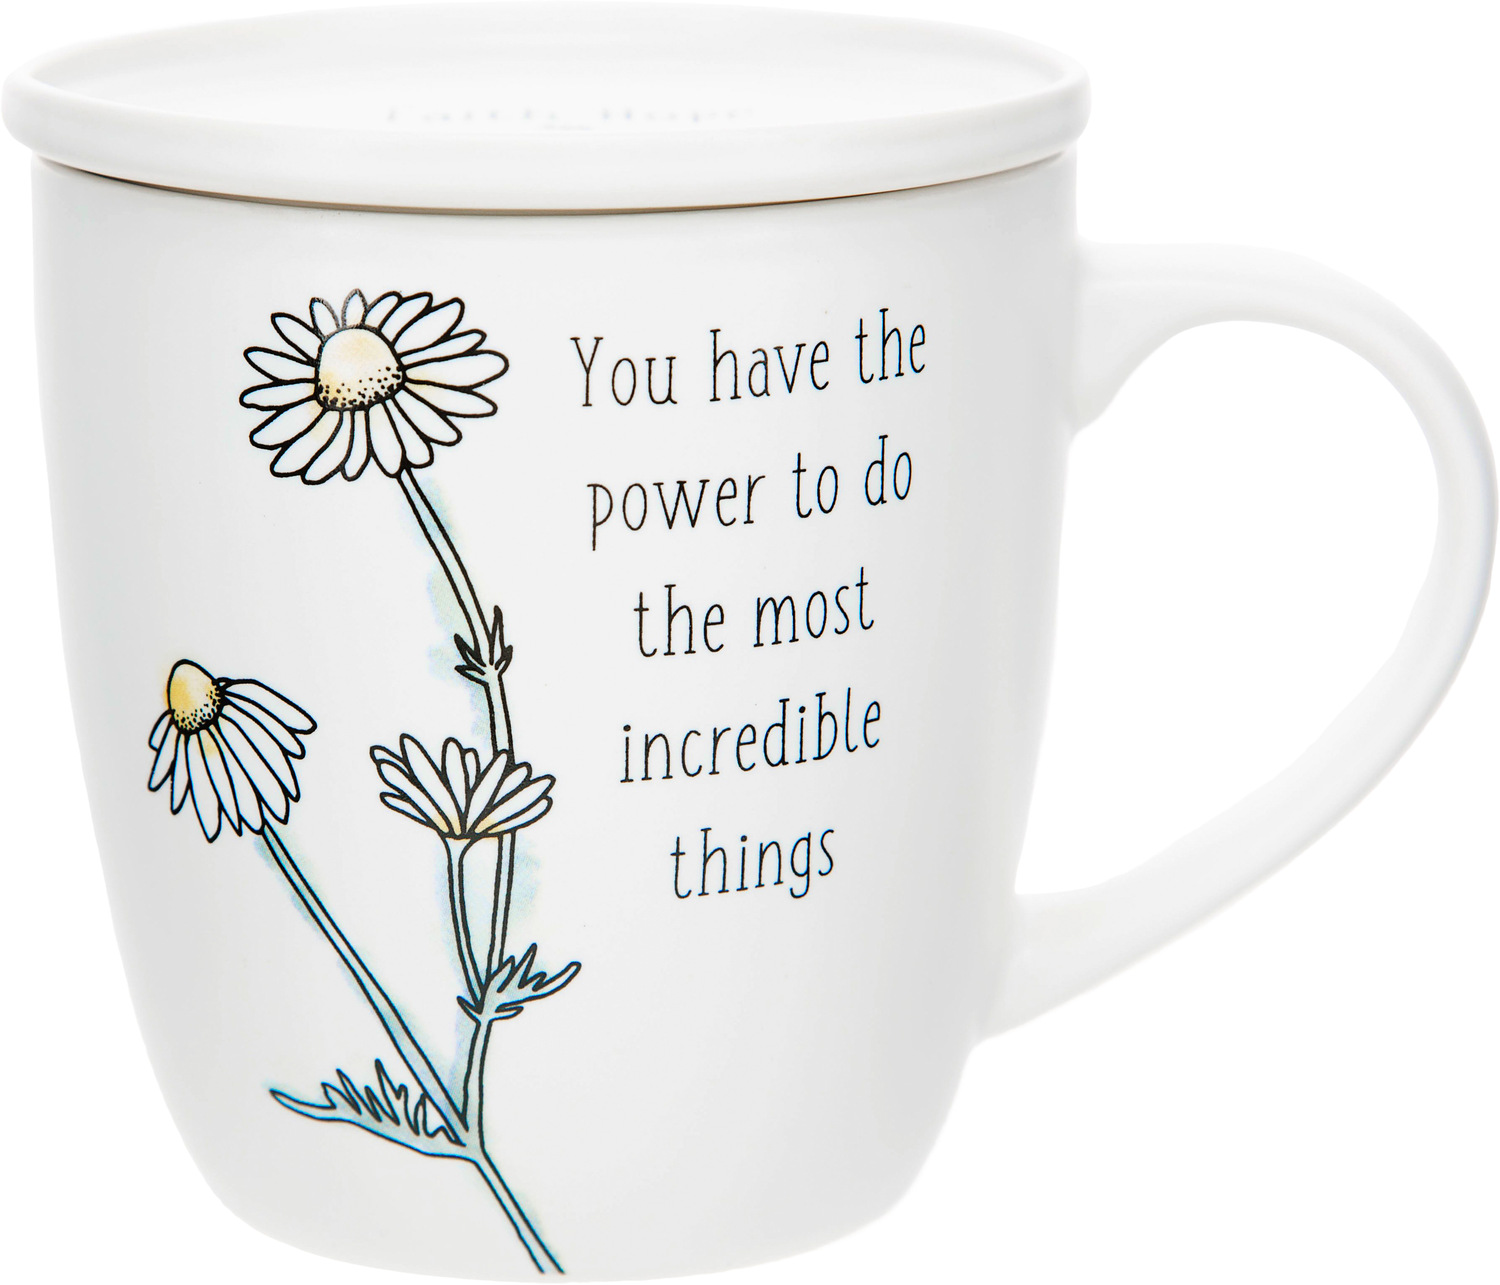 Incredible Things by Faith Hope and Healing - Incredible Things - 17 oz Cup with Coaster Lid